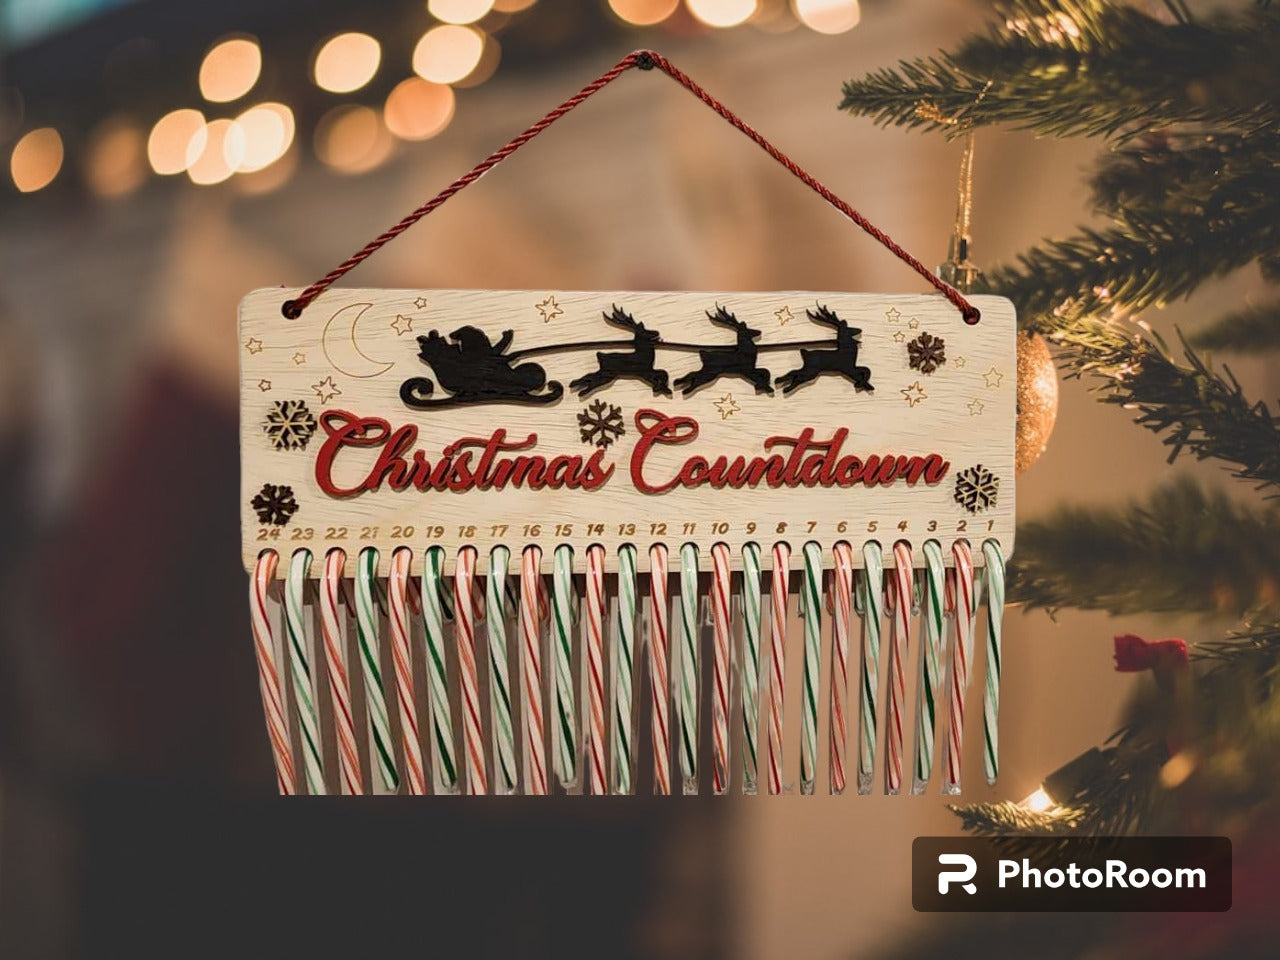 Christmas Countdown Candy Cane Board